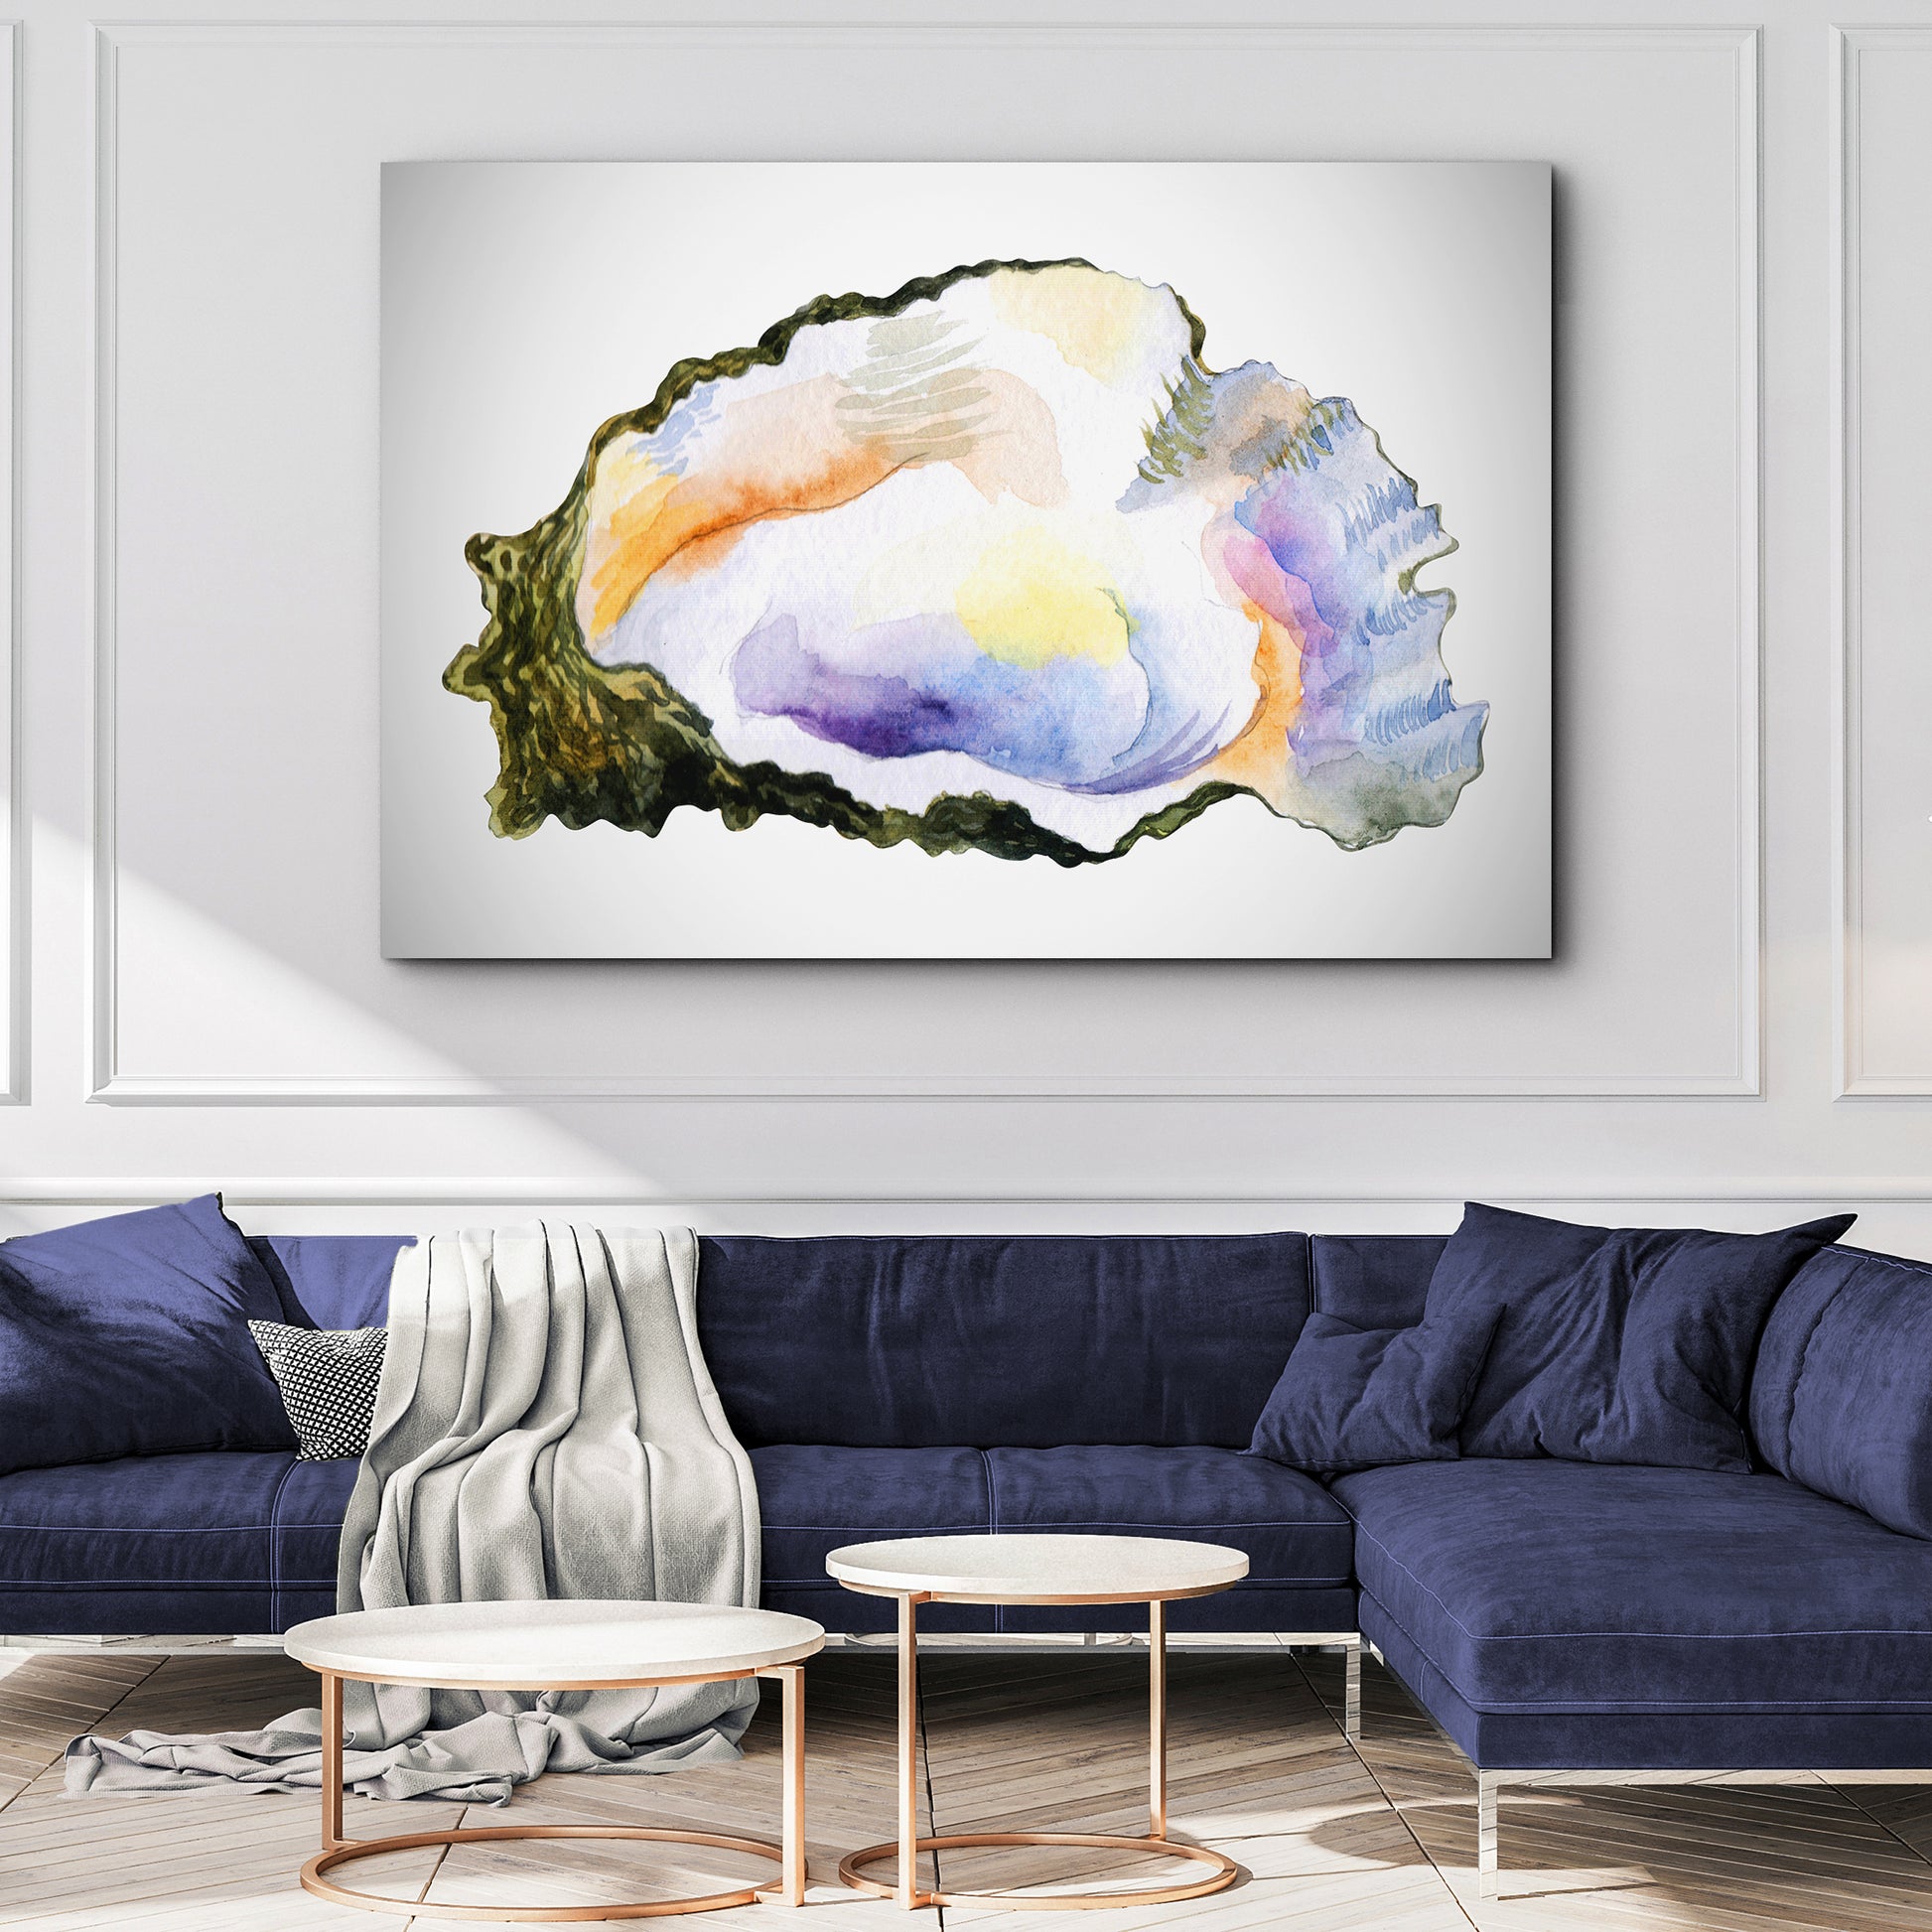 Oyster Watercolor Canvas Wall Art - Image by Tailored Canvases